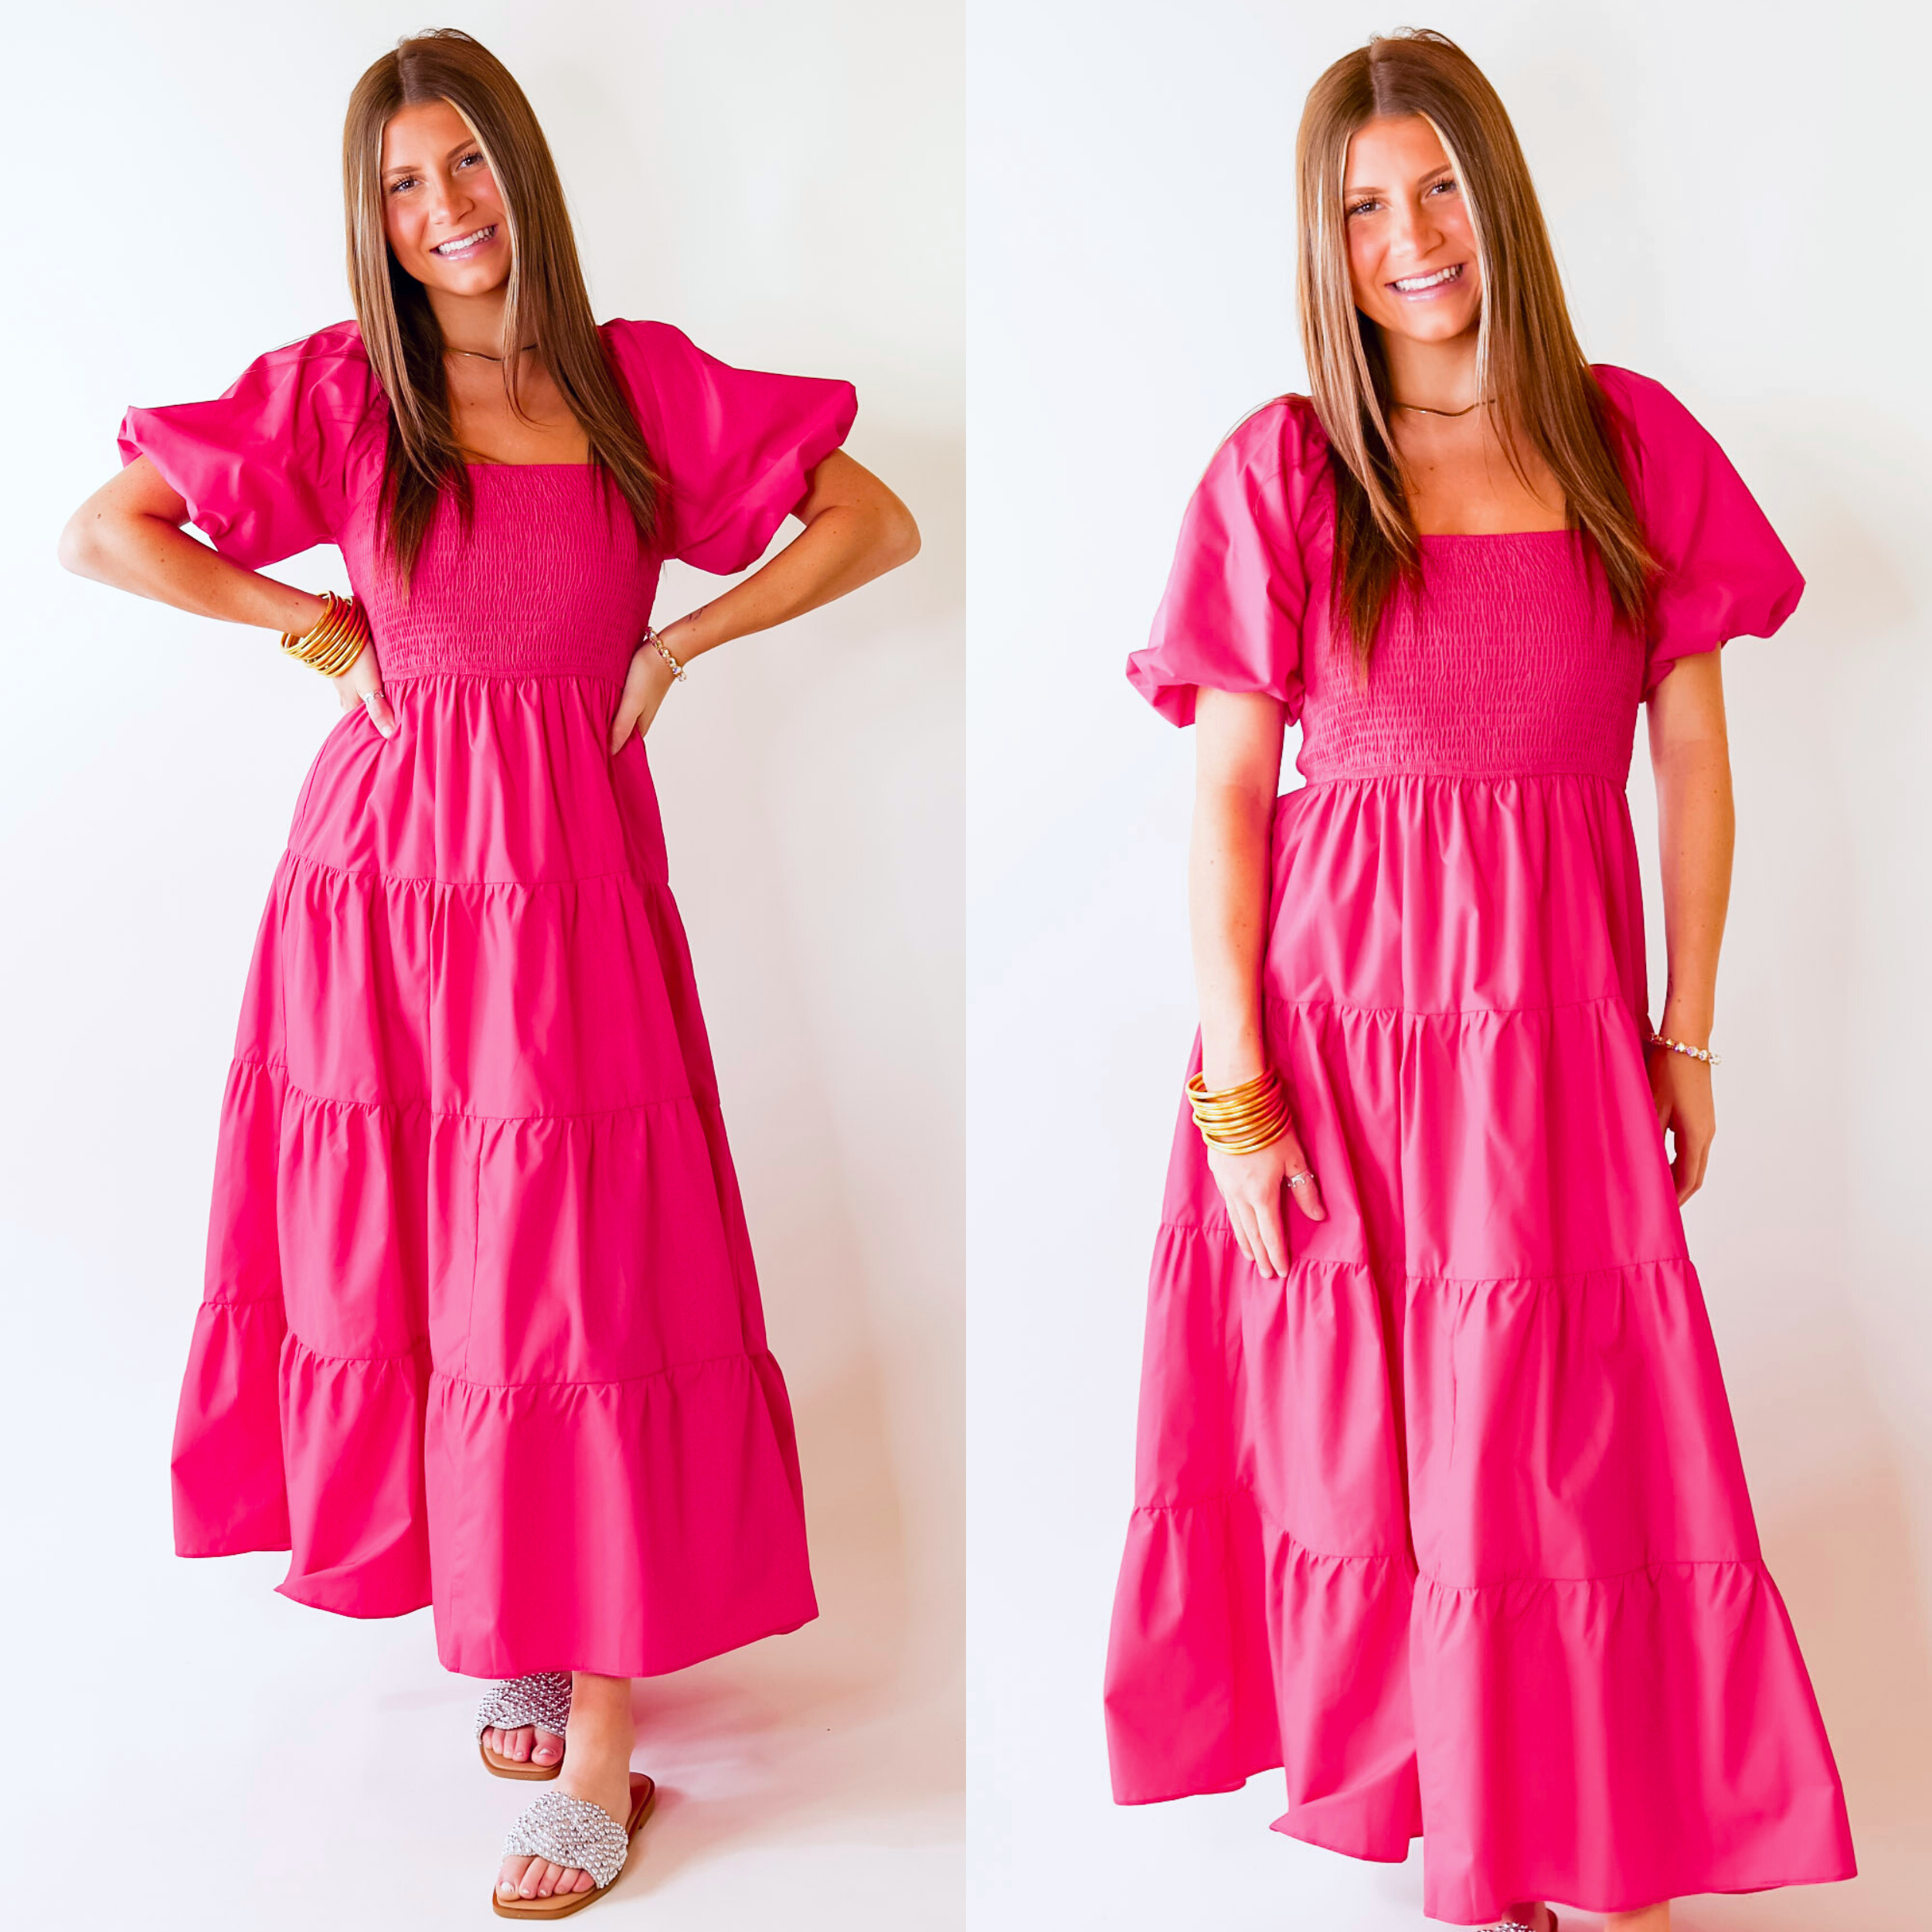 Model is wearing a long pink dress featuring puffed balloon sleeves, smocked bodice, and tiered skirt.